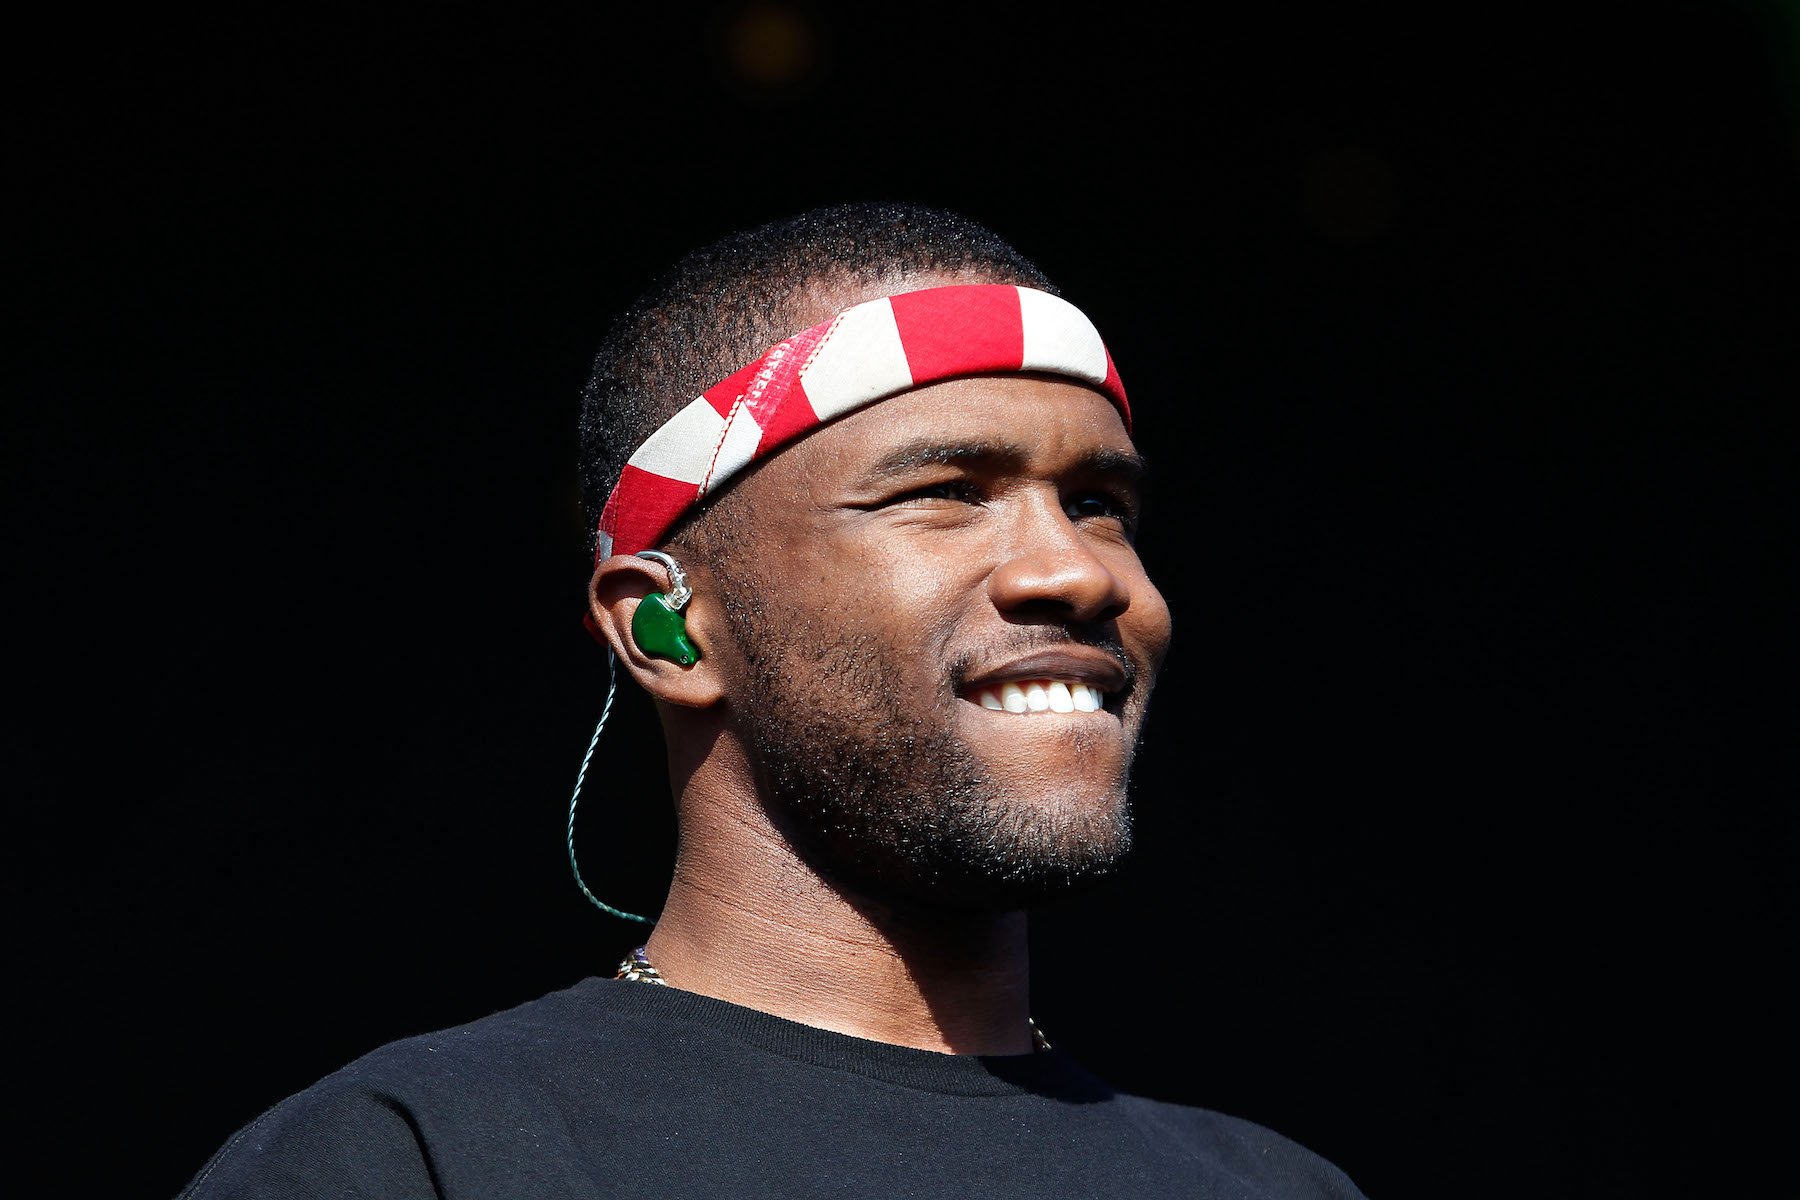 What Frank Ocean Said to Make People Think He's Retiring